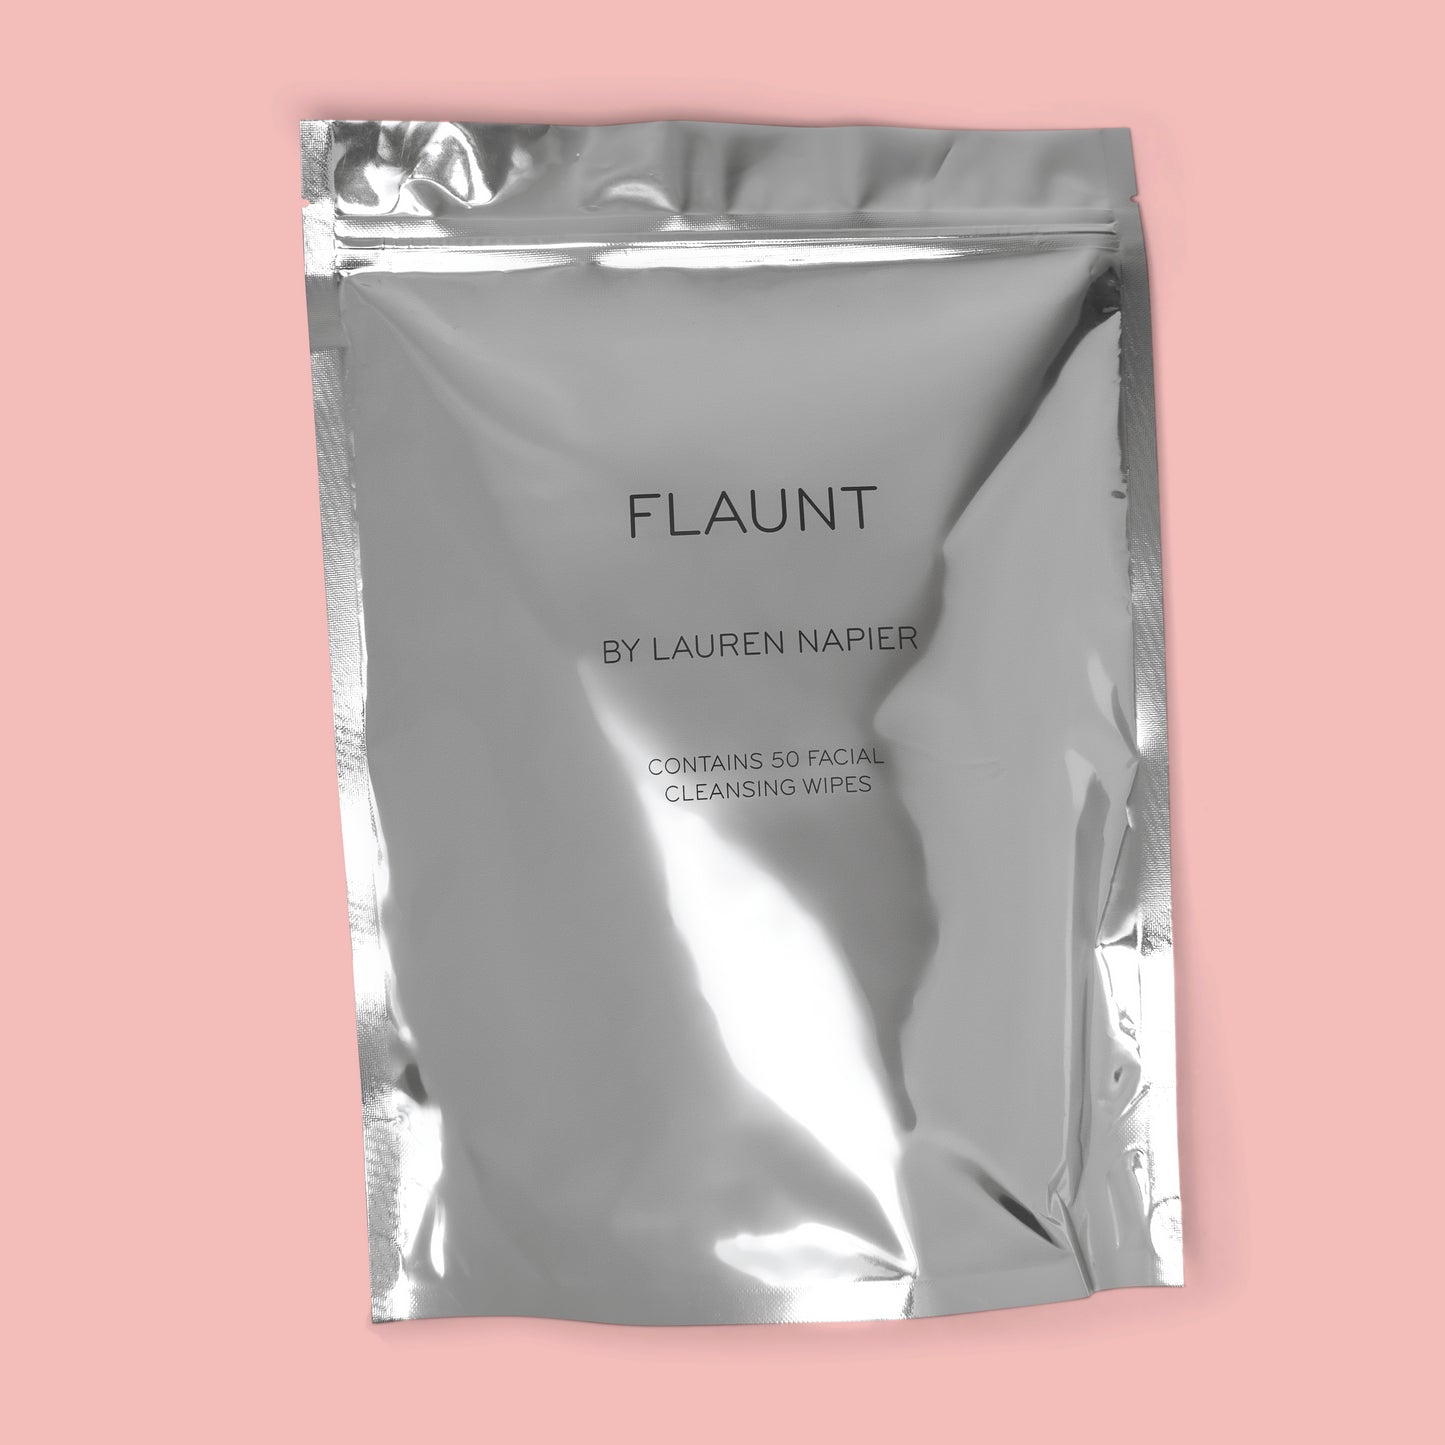 Flaunt Facial Cleansing Wipes- 50 count